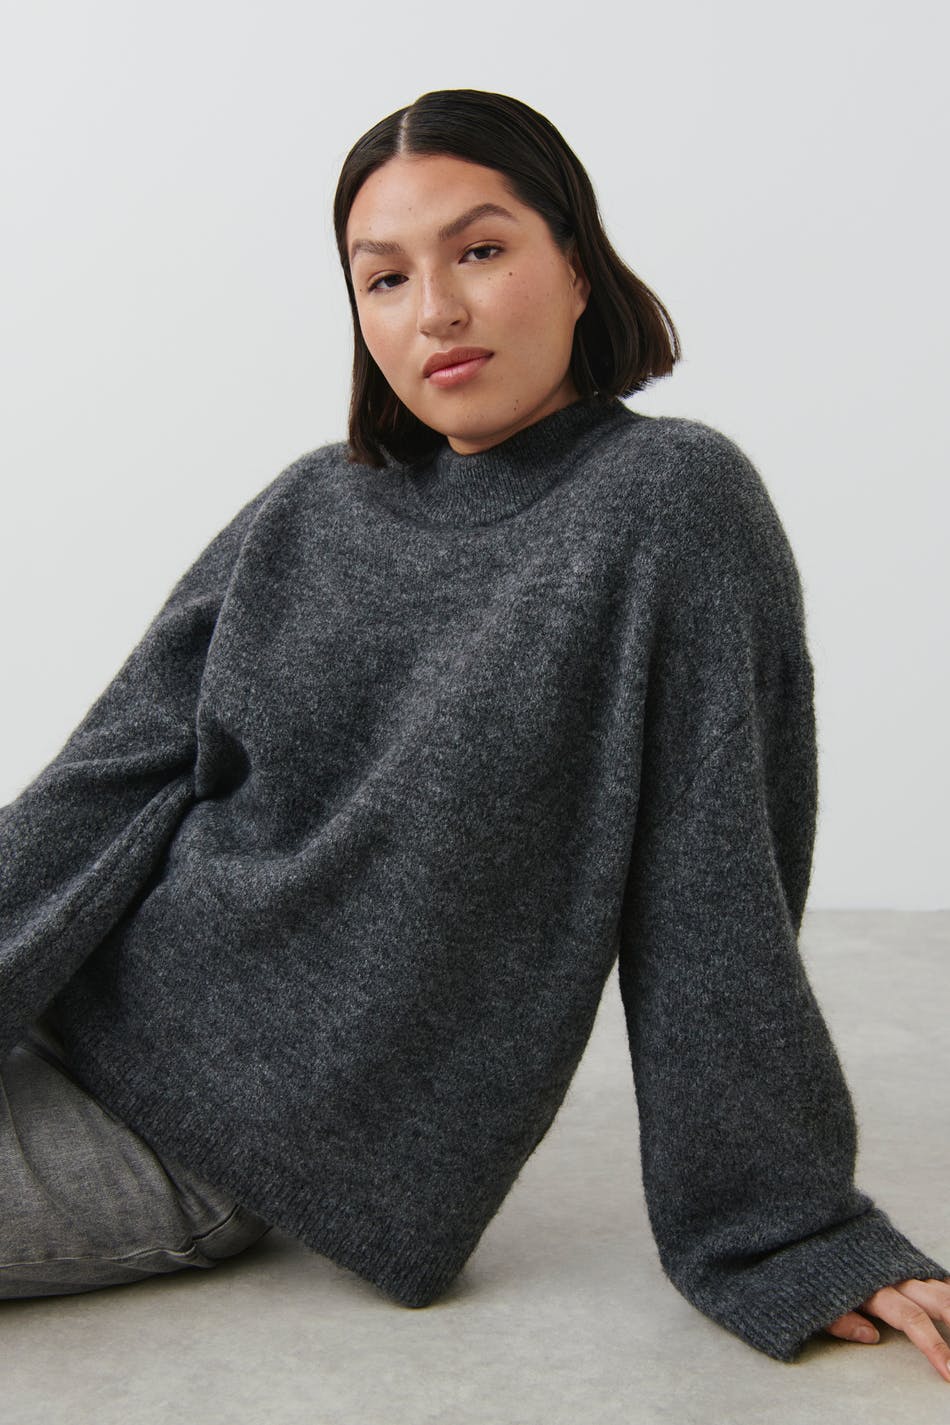 Crew neck knitted sweater - Gina Tricot